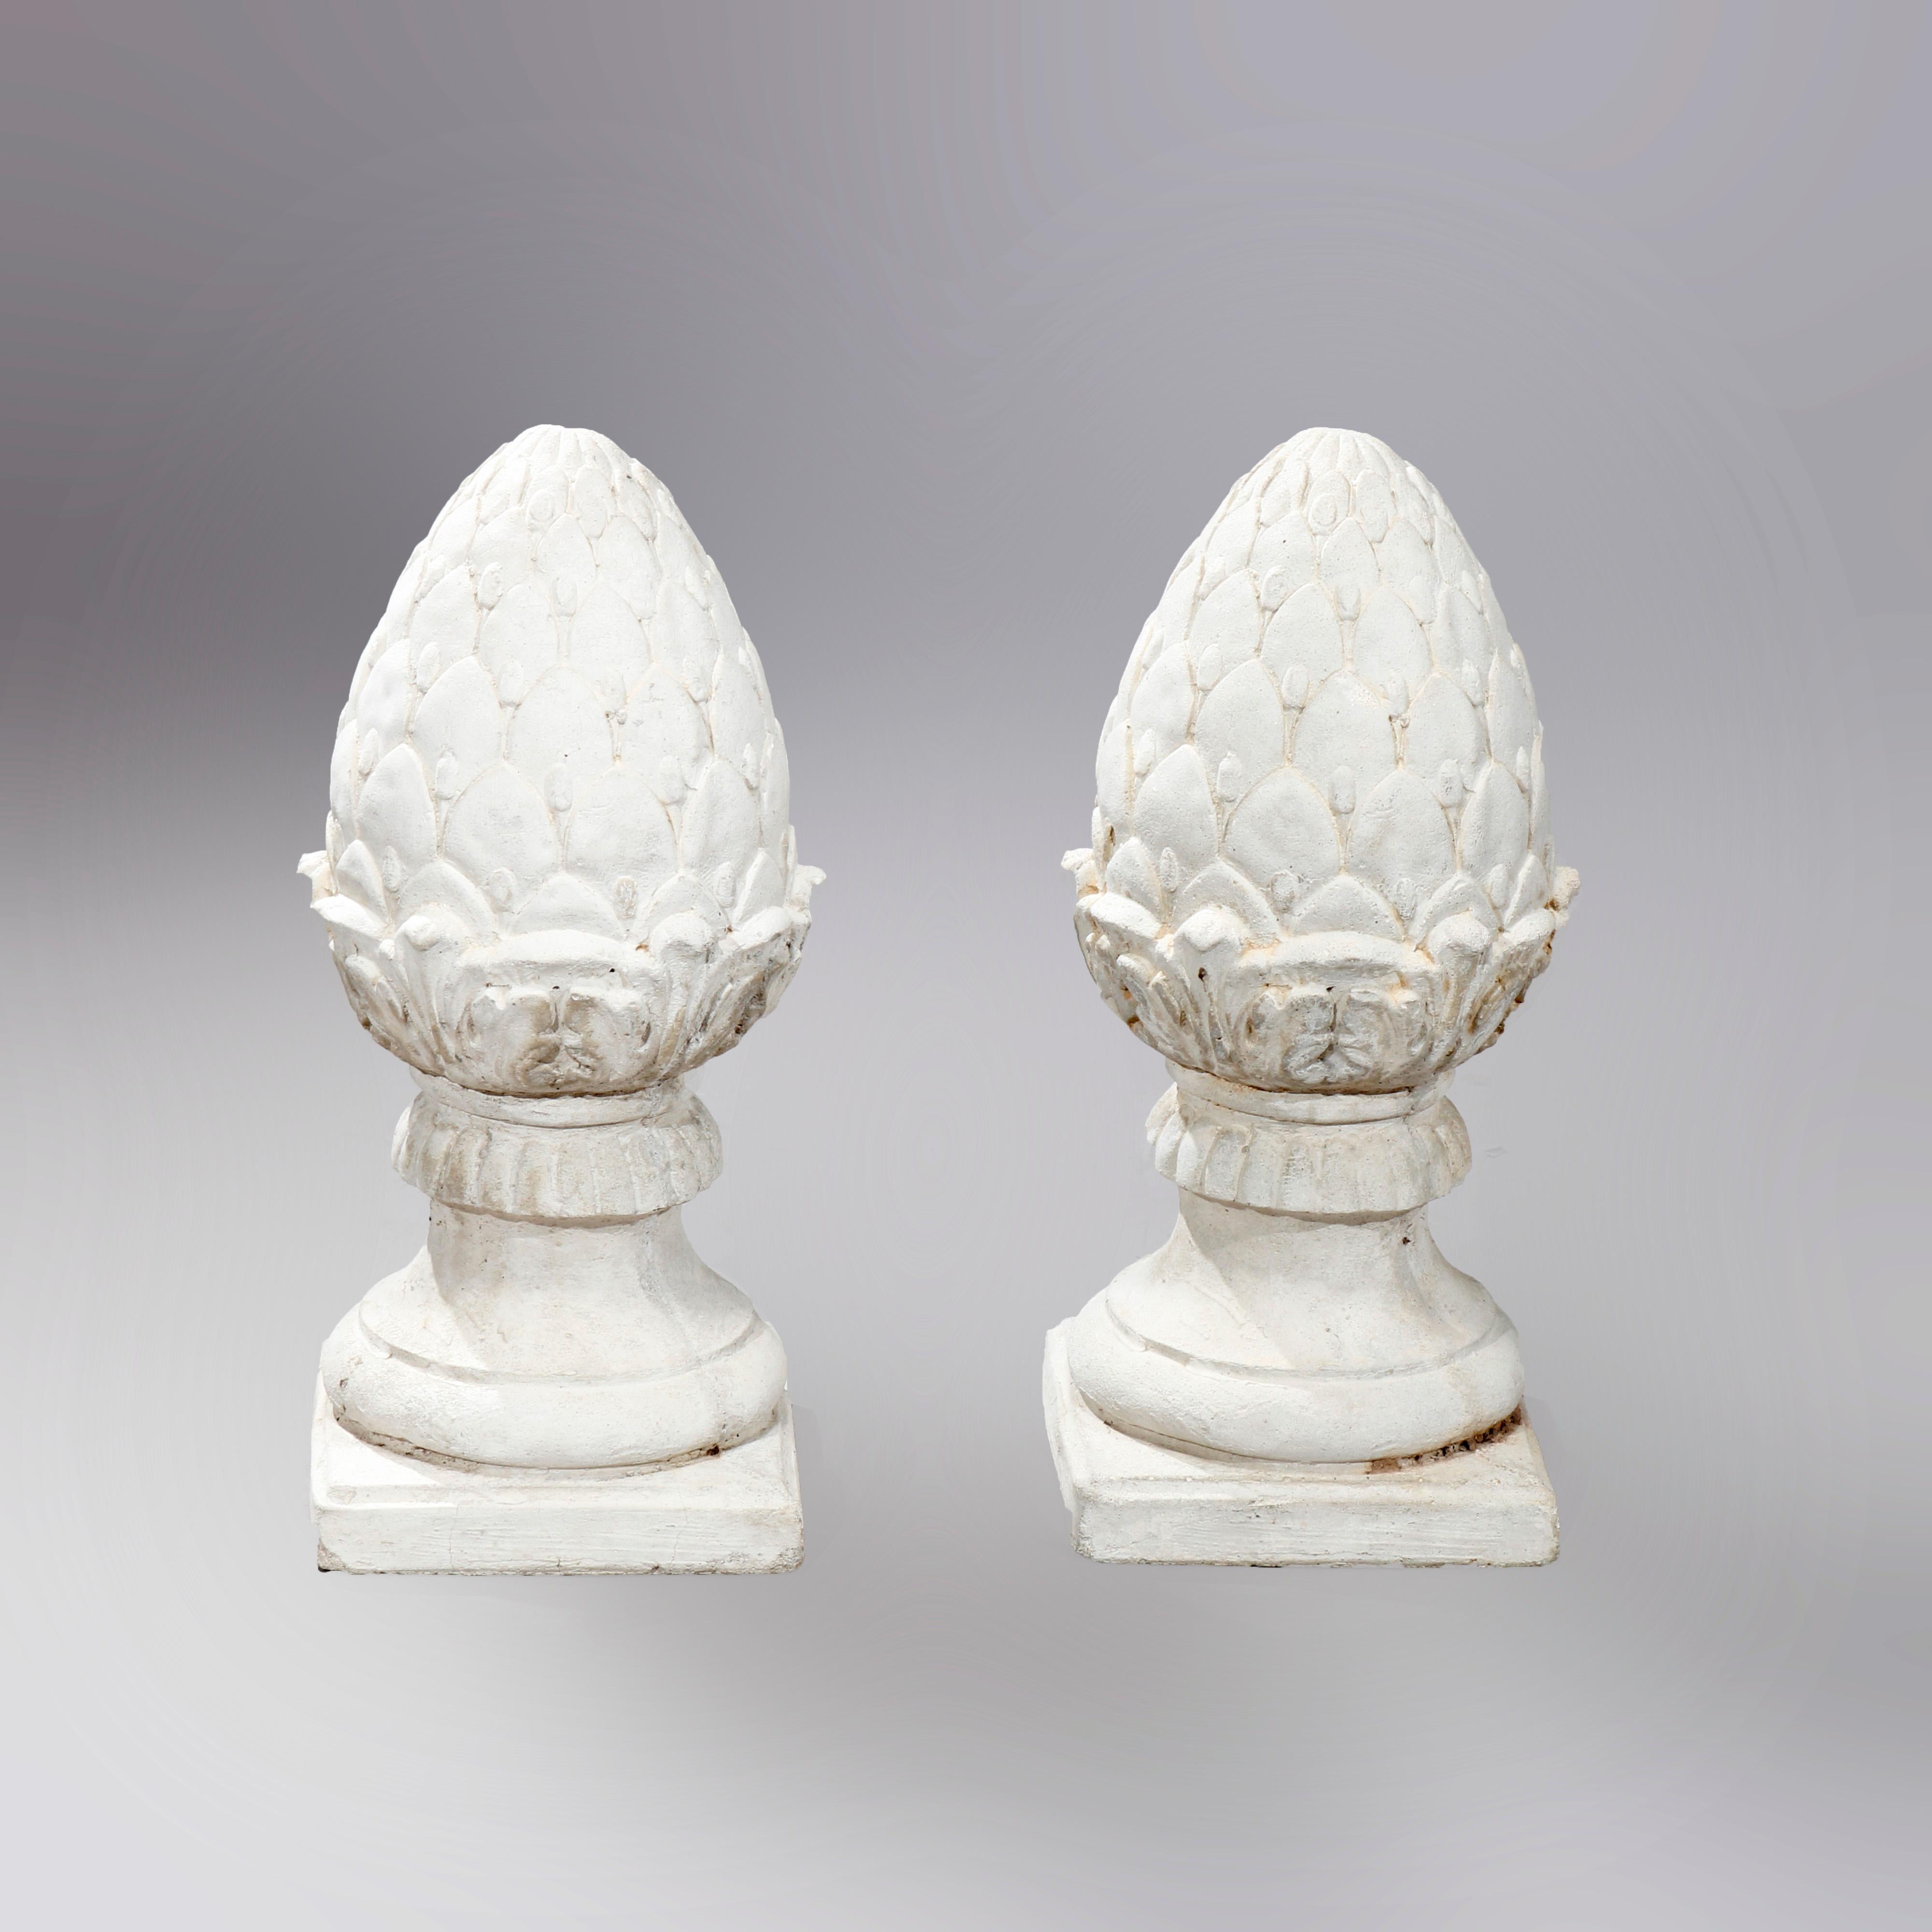 A pair of antique garden finials offer cast stone construction in acorn or artichoke form seated on square bases, 20th century

Measures: 19